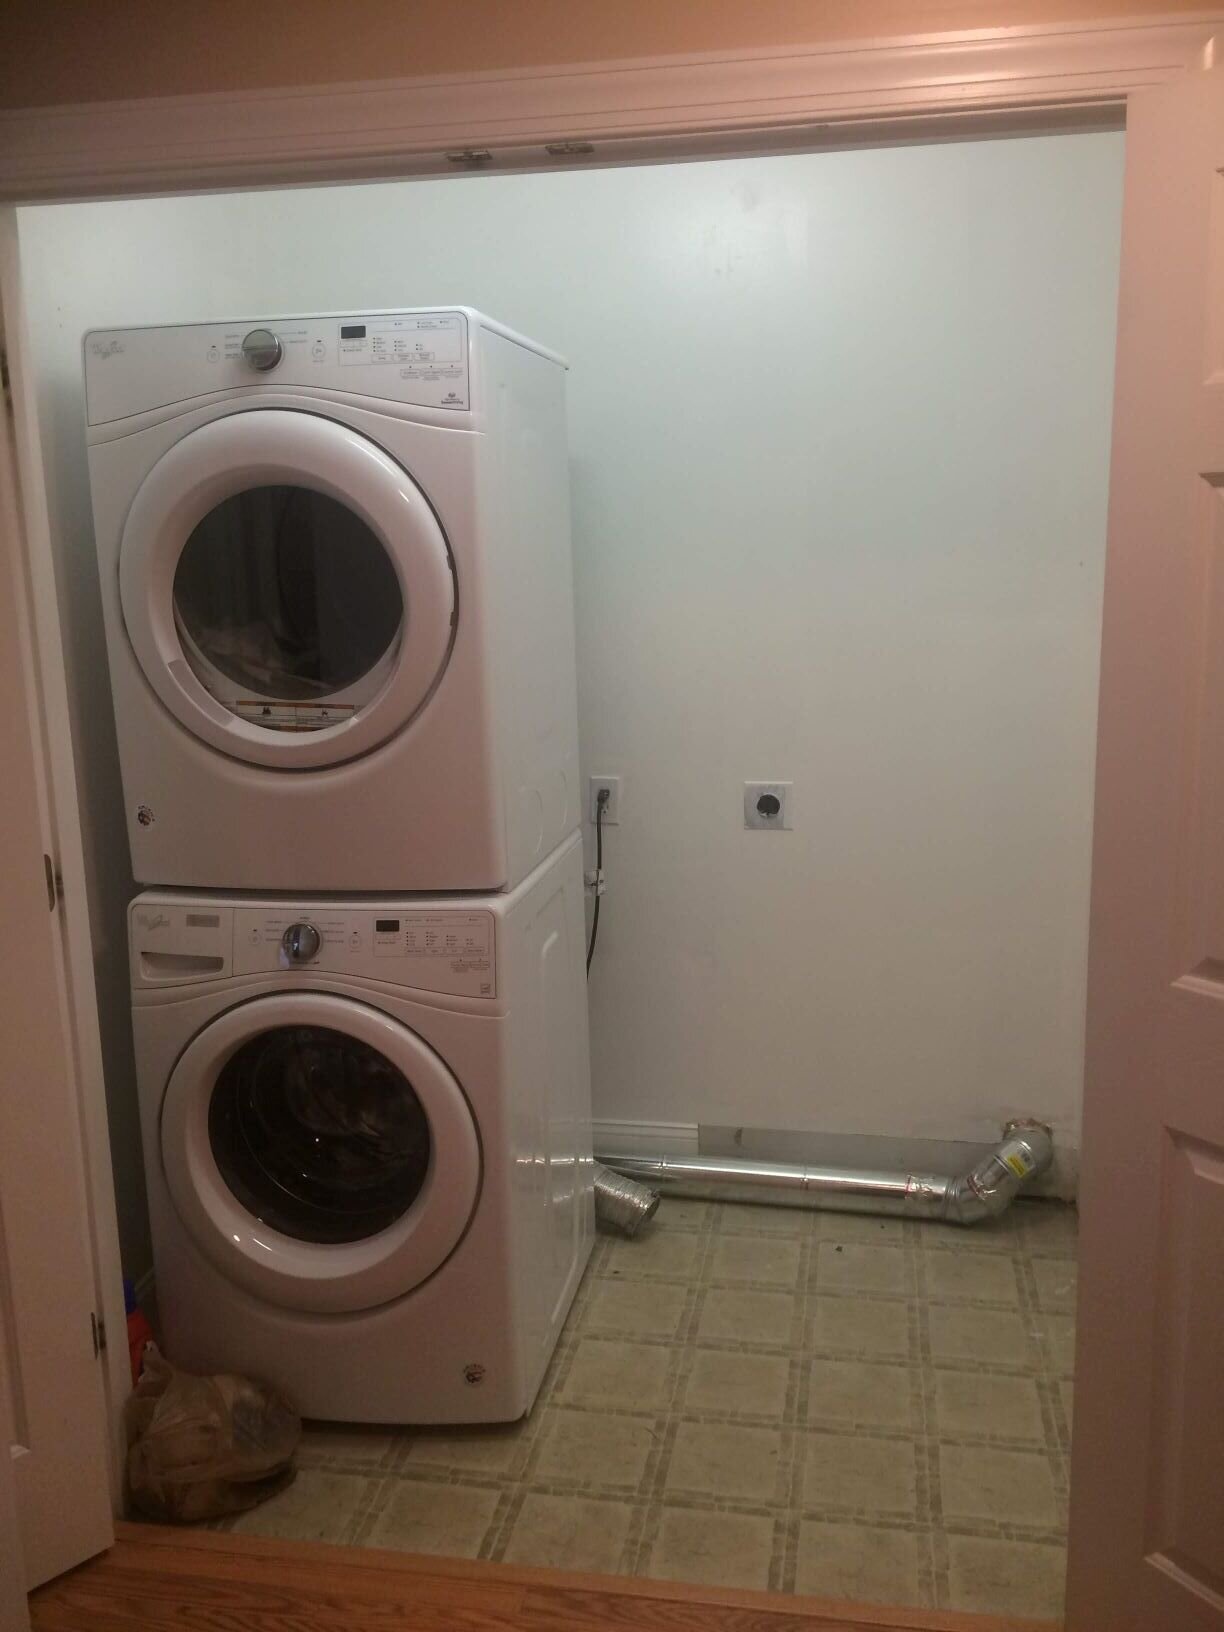  This laundry closet was ready for more storage capacity after the homeowner converted to a stackable washer and dryer. 